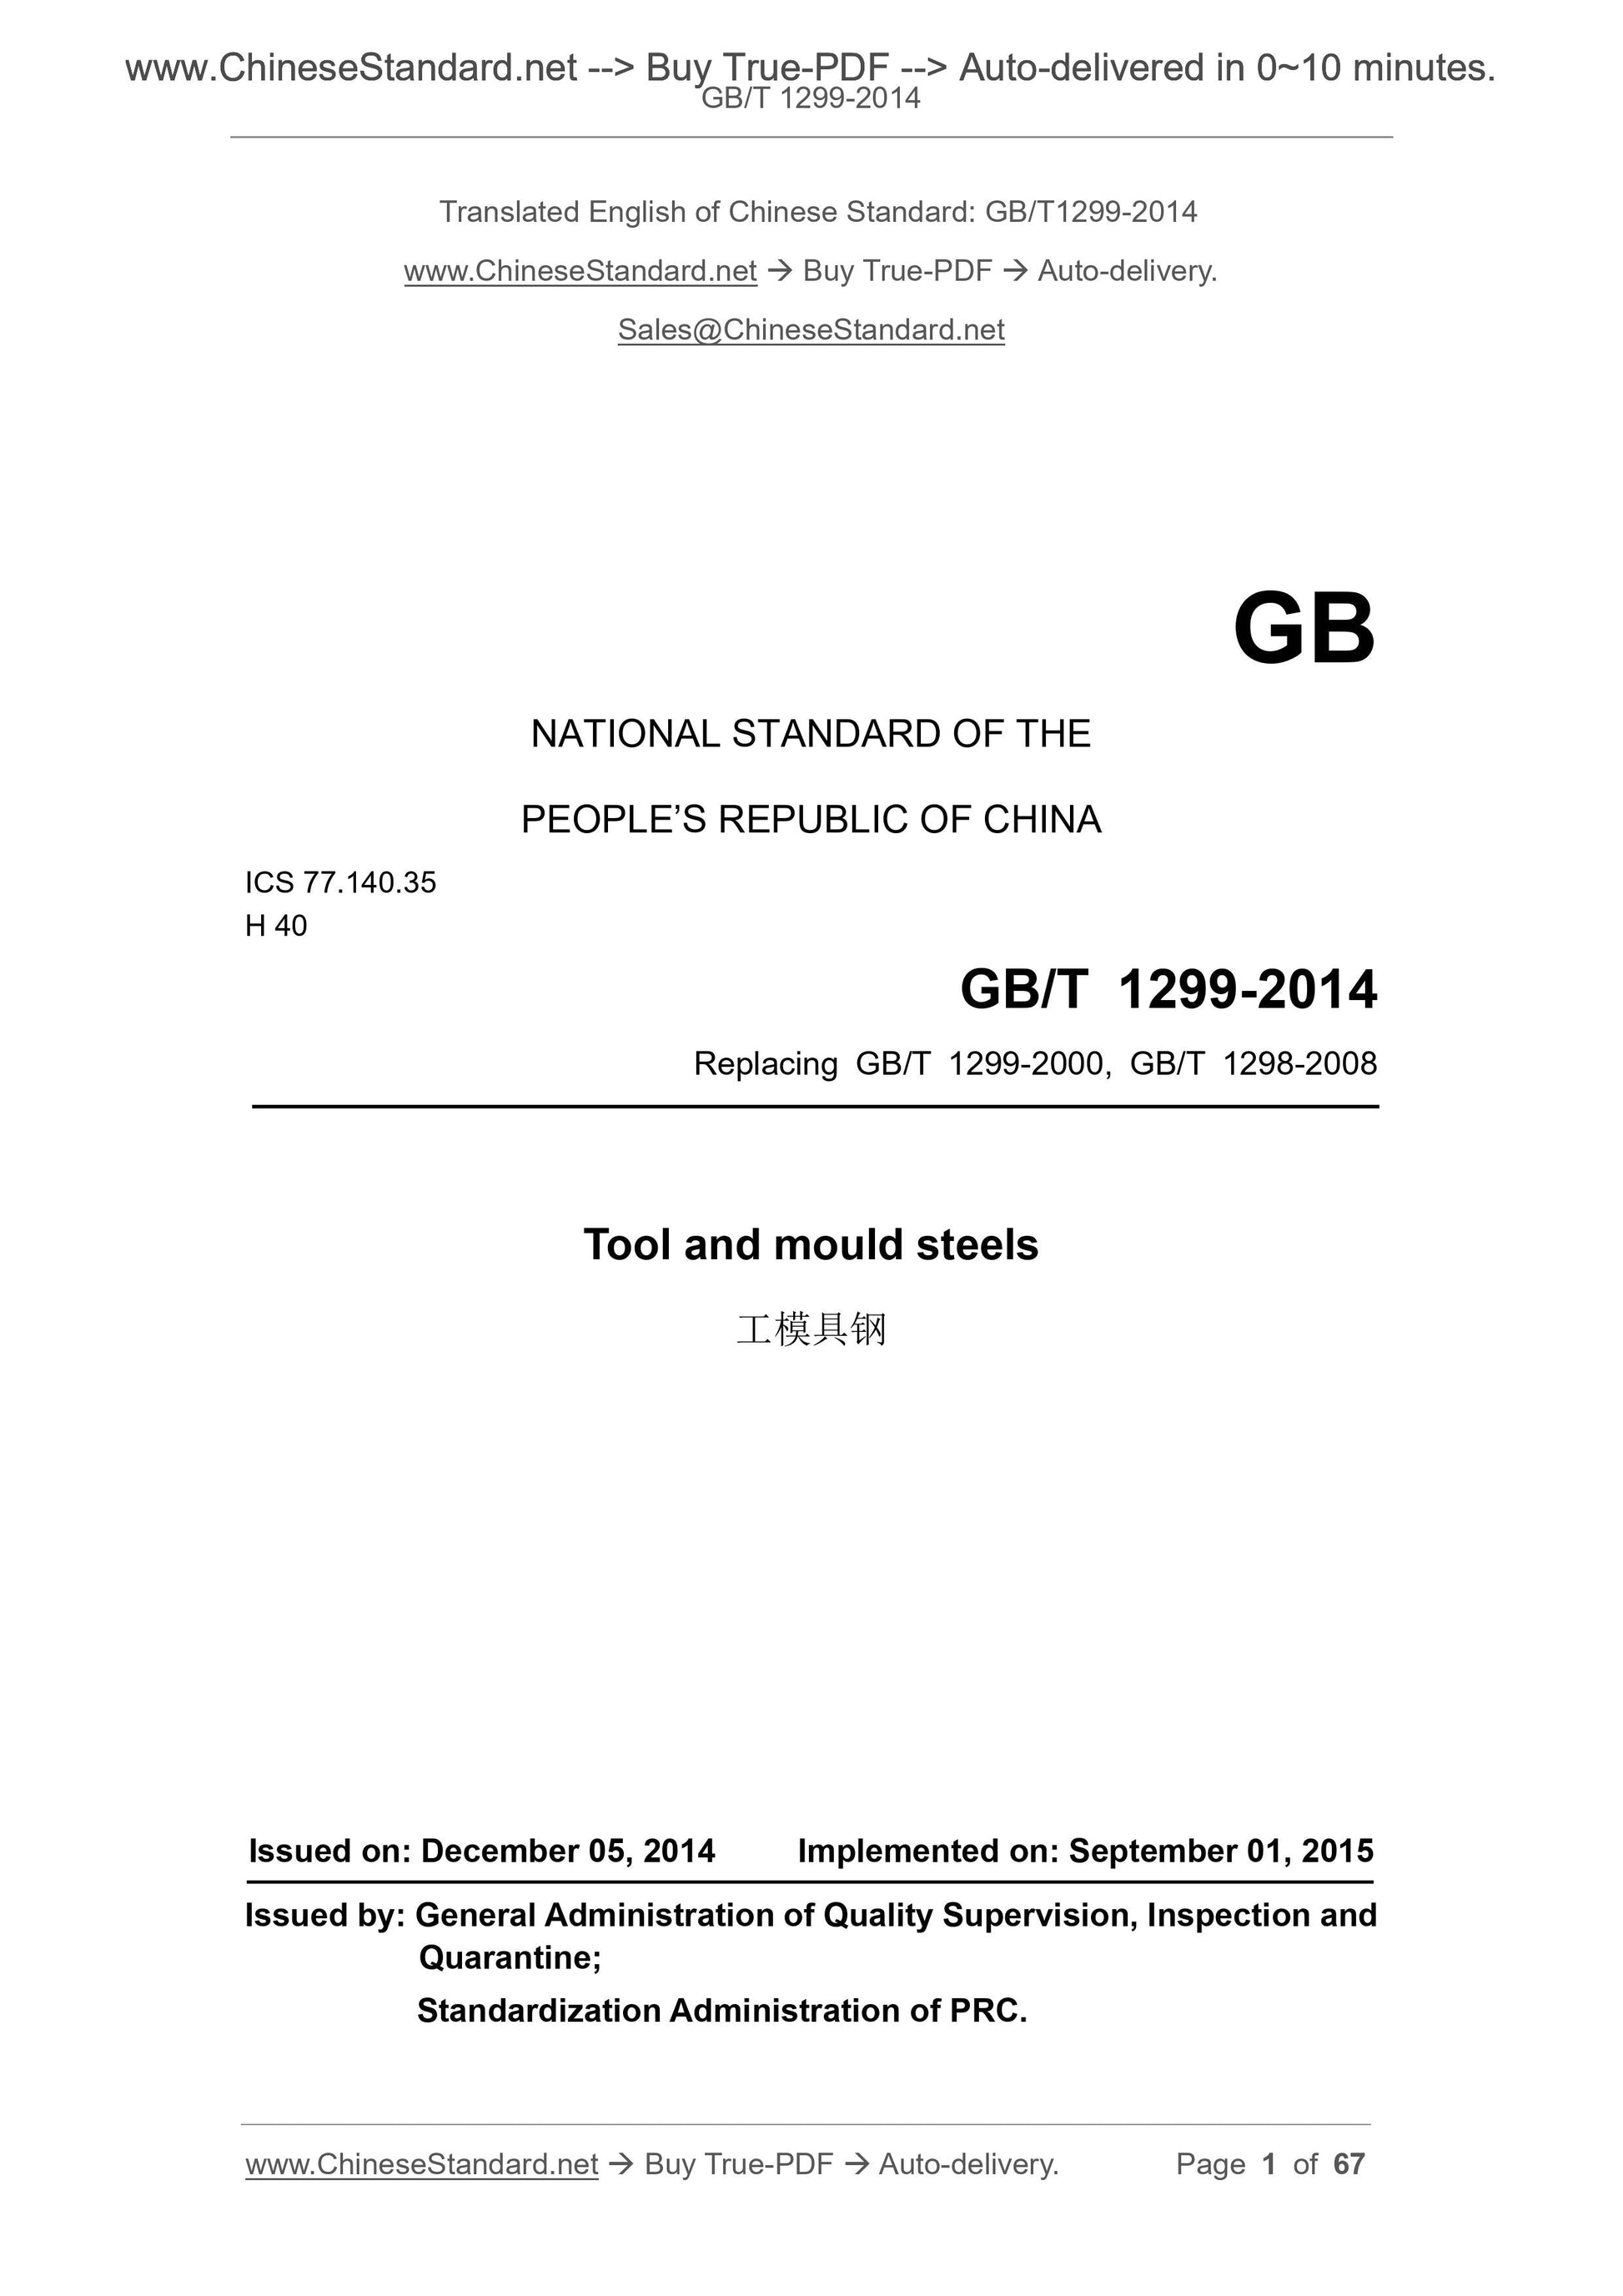 GB/T 1299-2014 Page 1